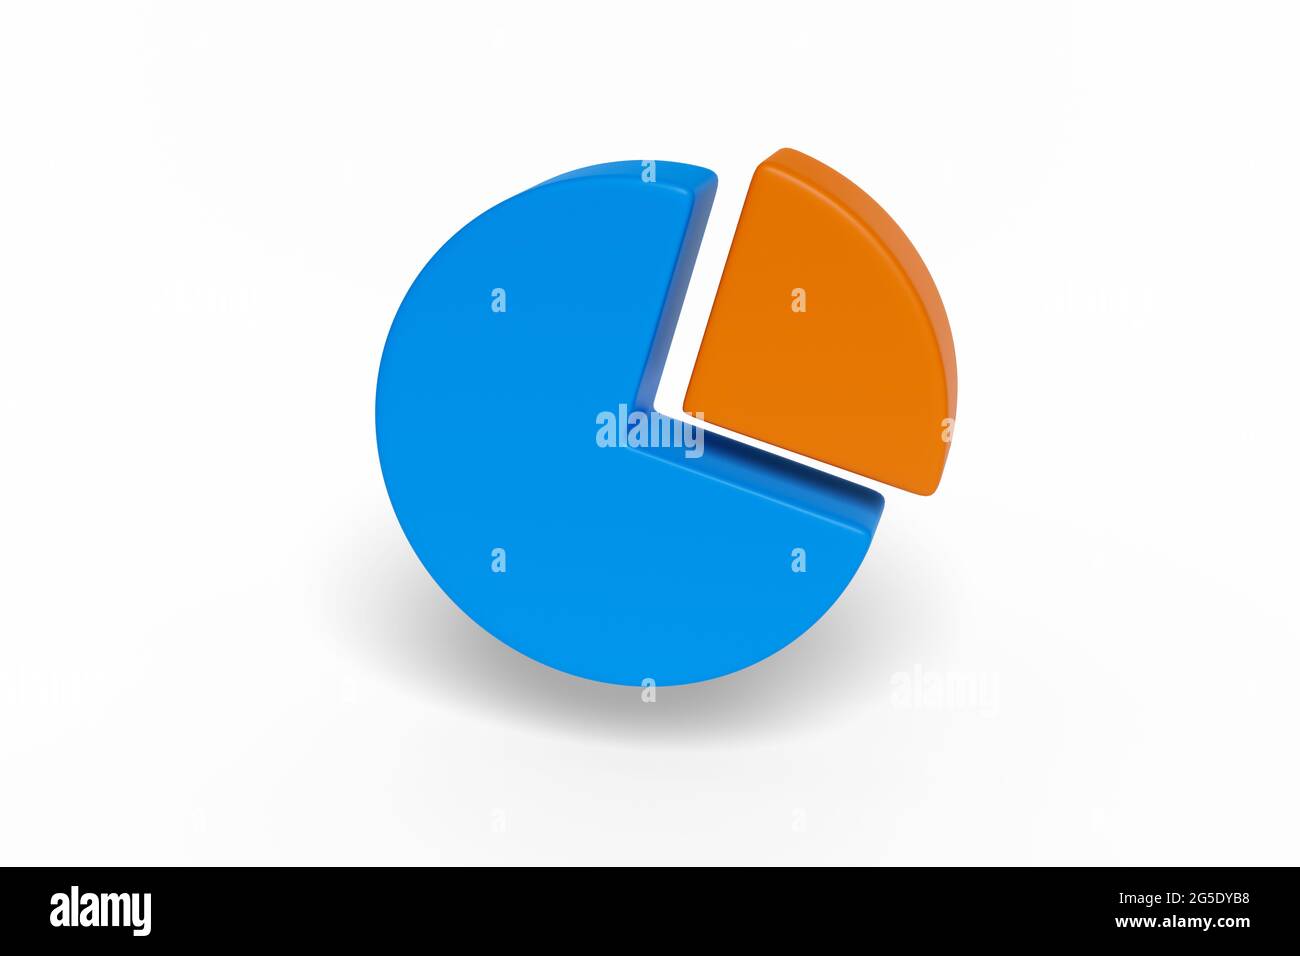 Pie chart isolated in white background. 3d illustration. Stock Photo